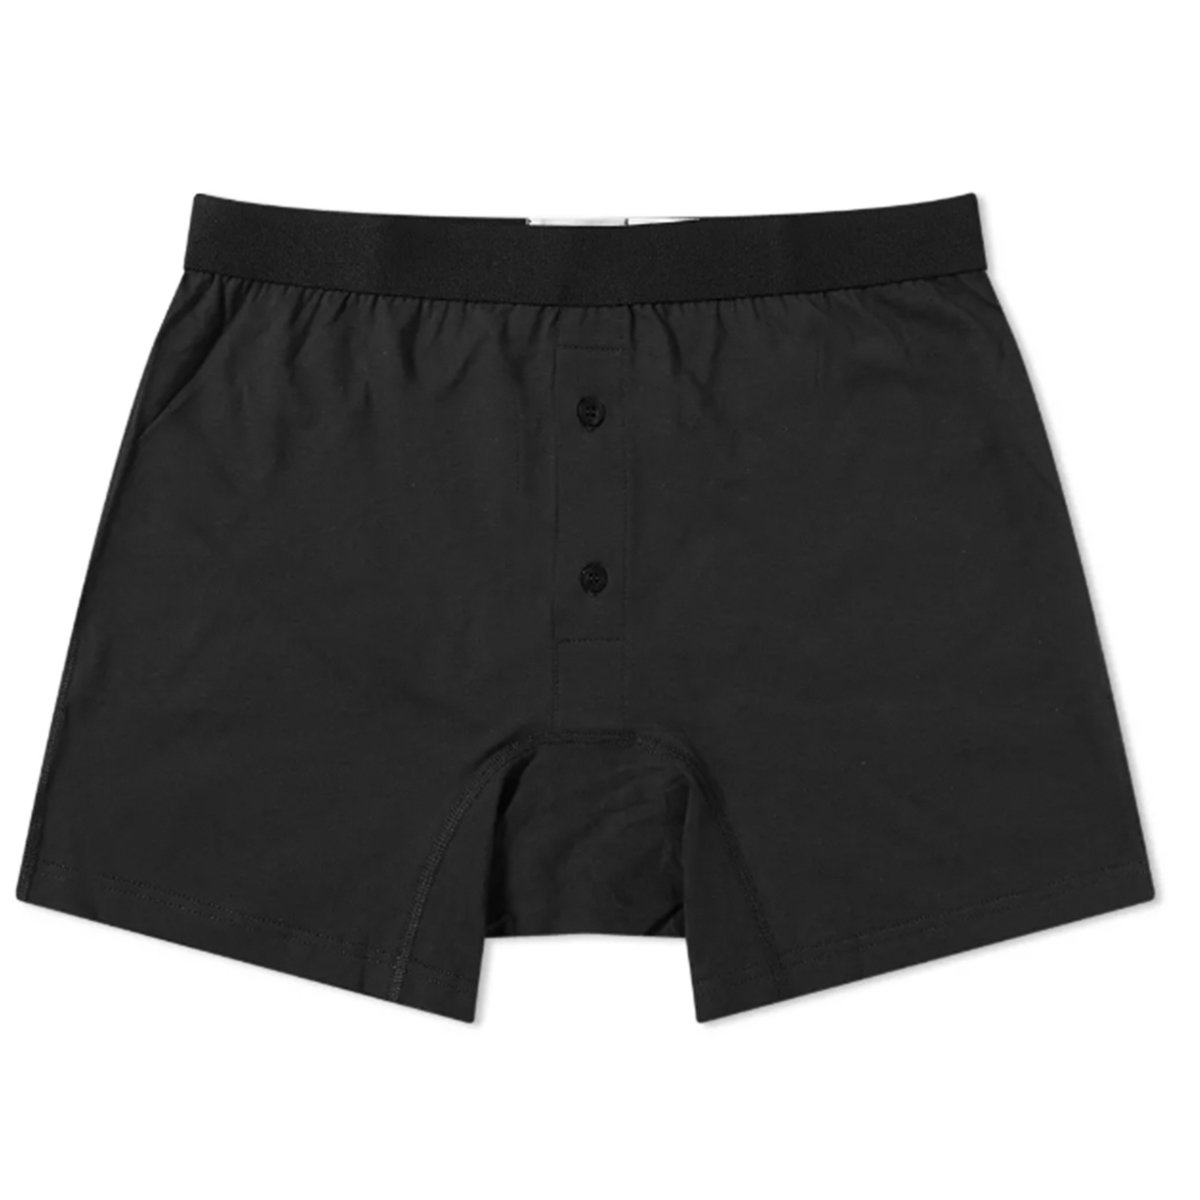 Cdg Shirt Forever Two Button Boxers Black S Black